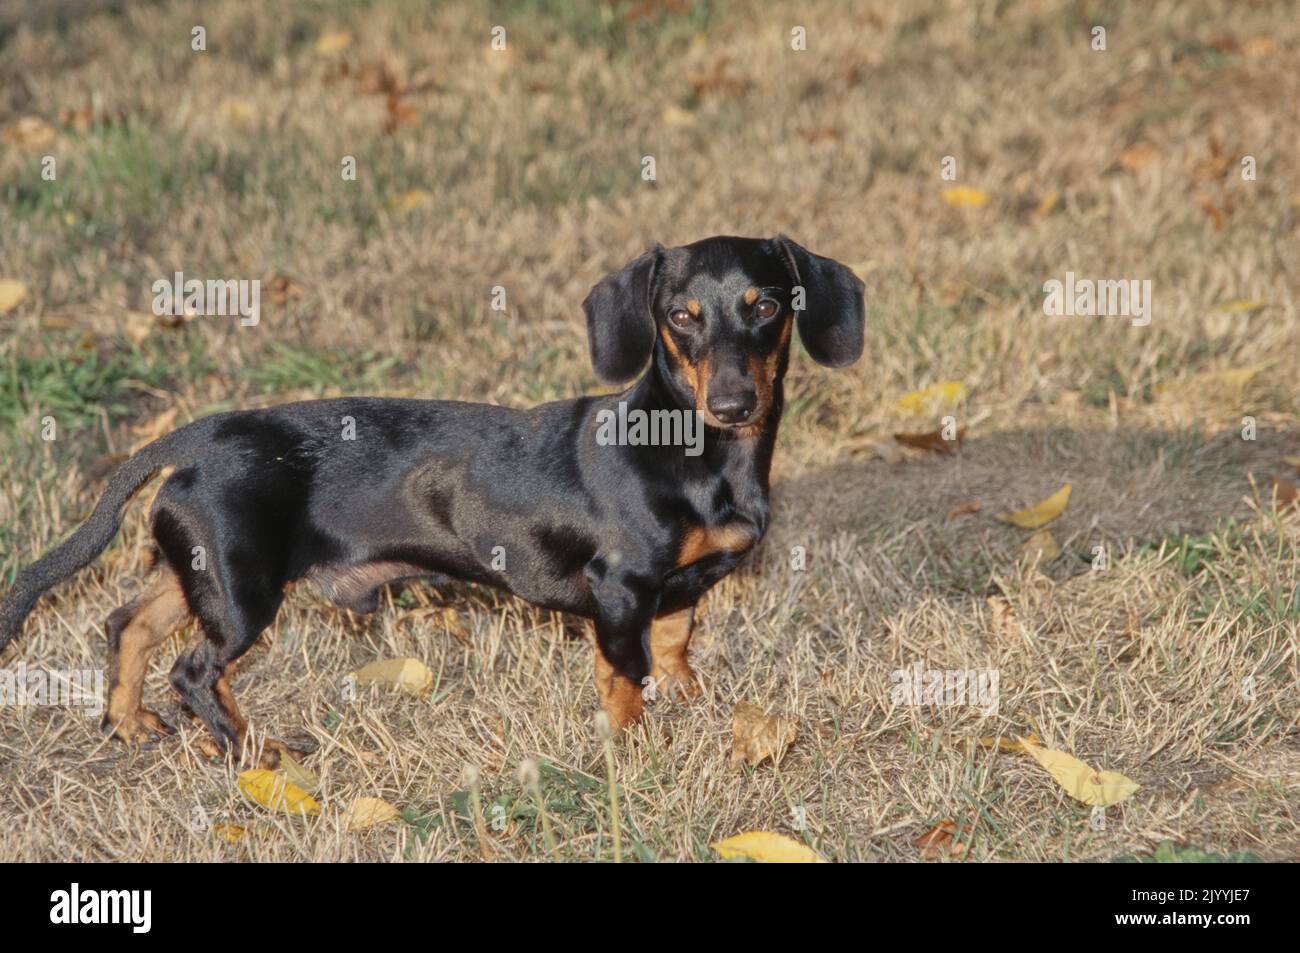 Dachshund in field with leaves Stock Photo